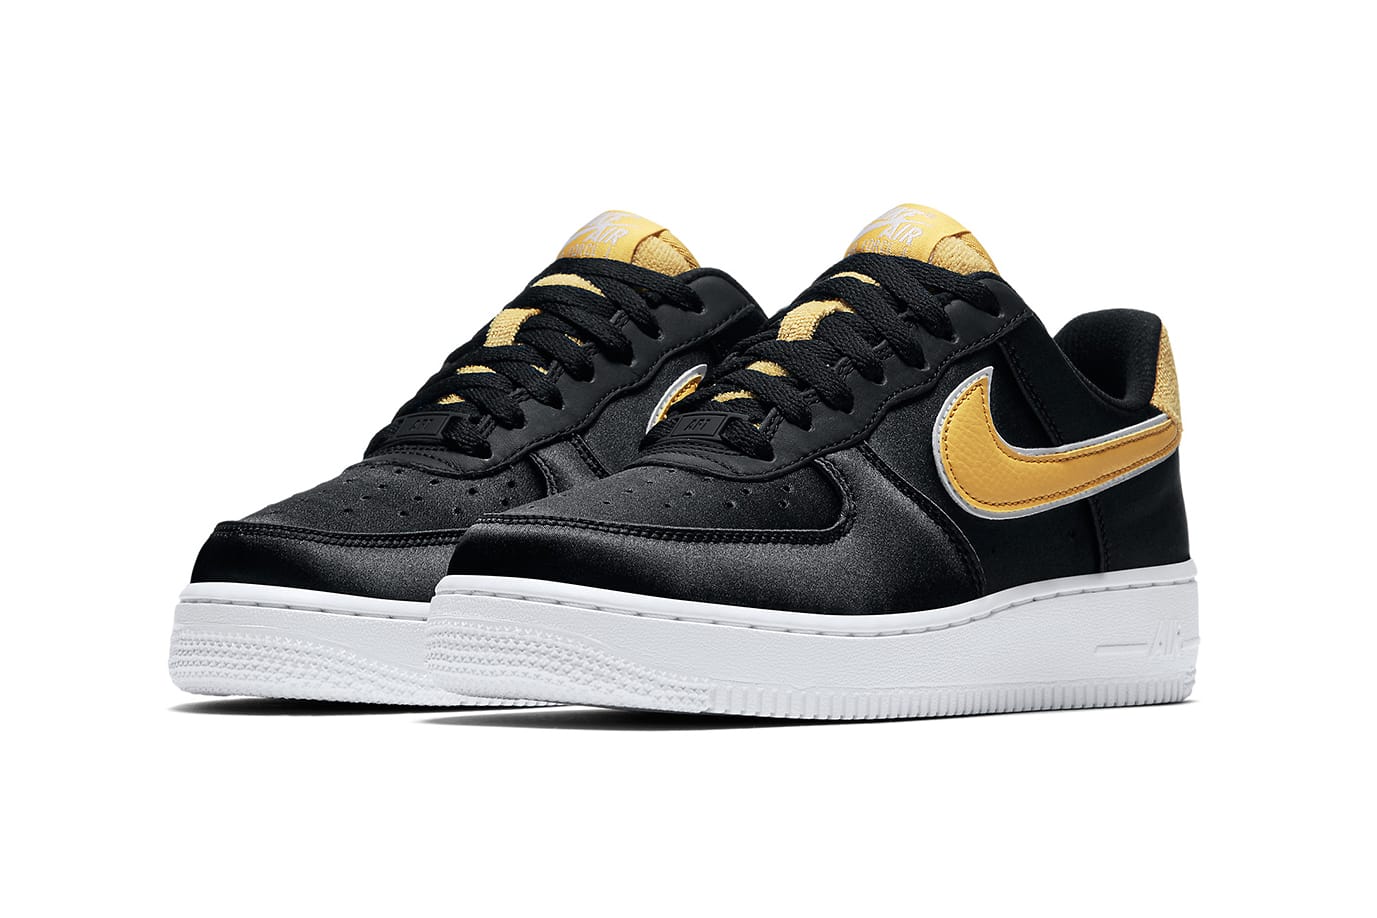 Nike Air Force 1 Low in Satin Black and 